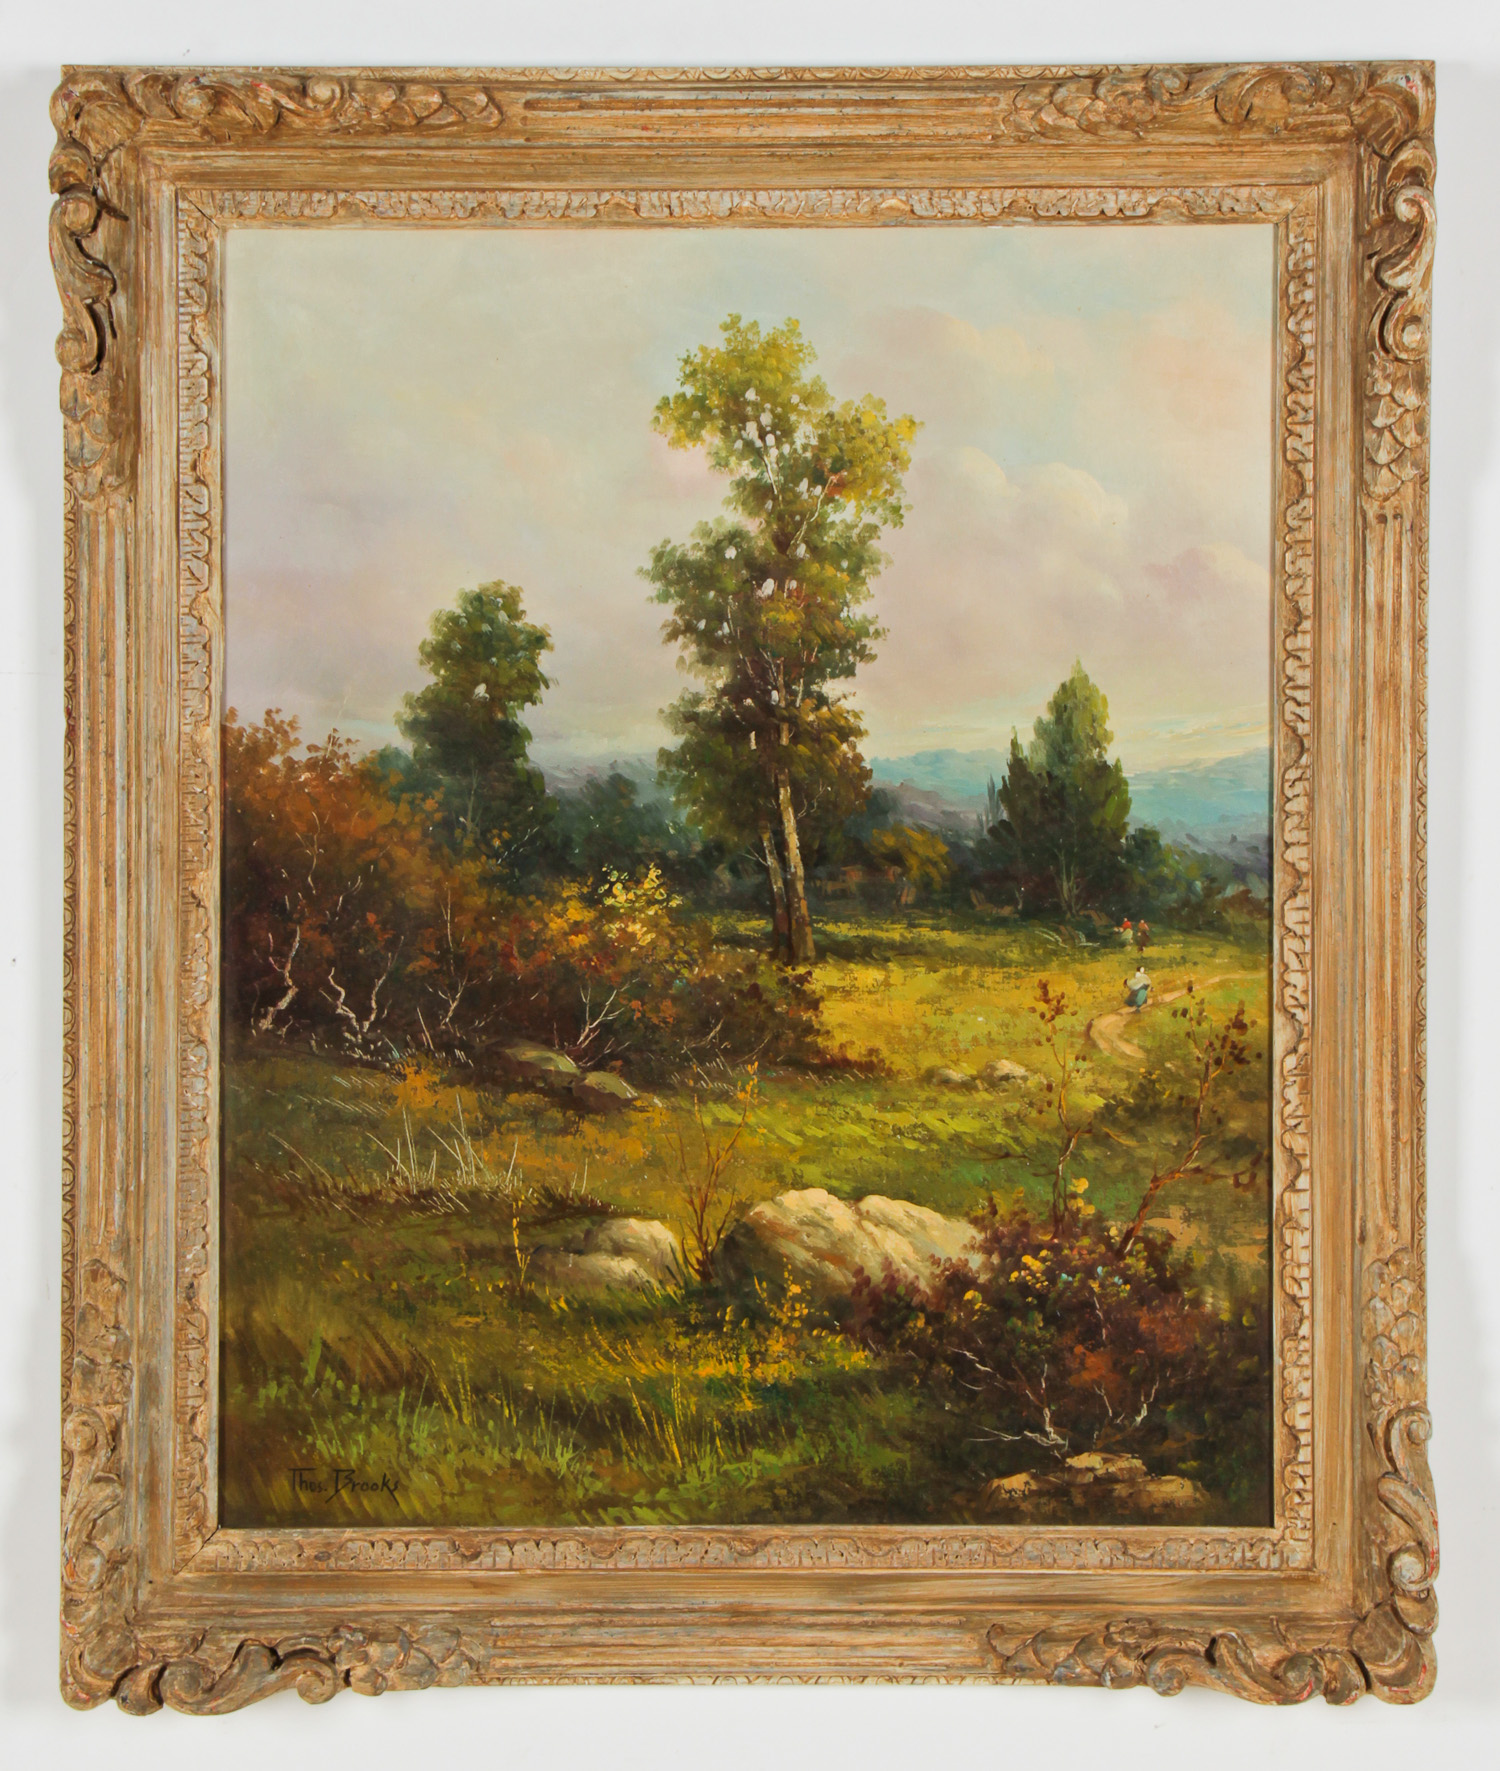 Thos. Brooks (19/20th c.) Landscape Painting, oil on canvas, in a carved wood frame. Size: 30" x